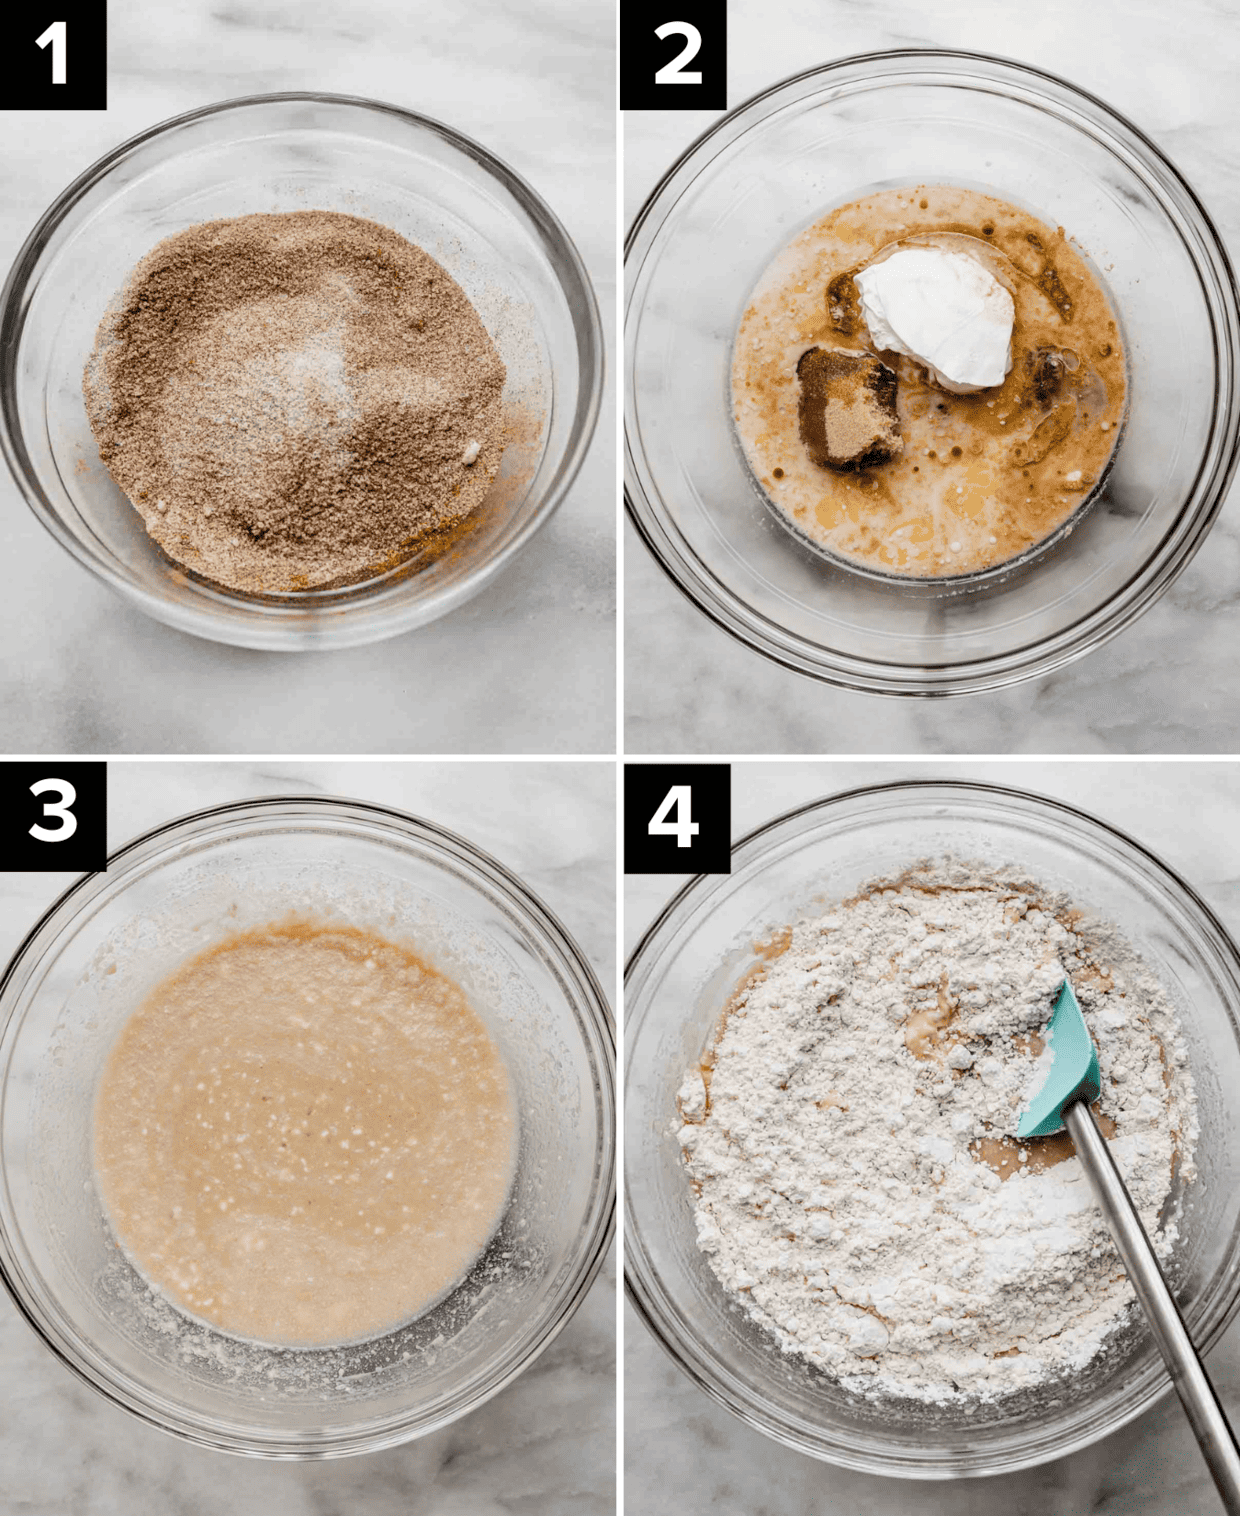 Four photos featuring a glass bowl with the addition of wet and dry ingredients into the bowl, to make a Cinnamon Swirl Bread batter.